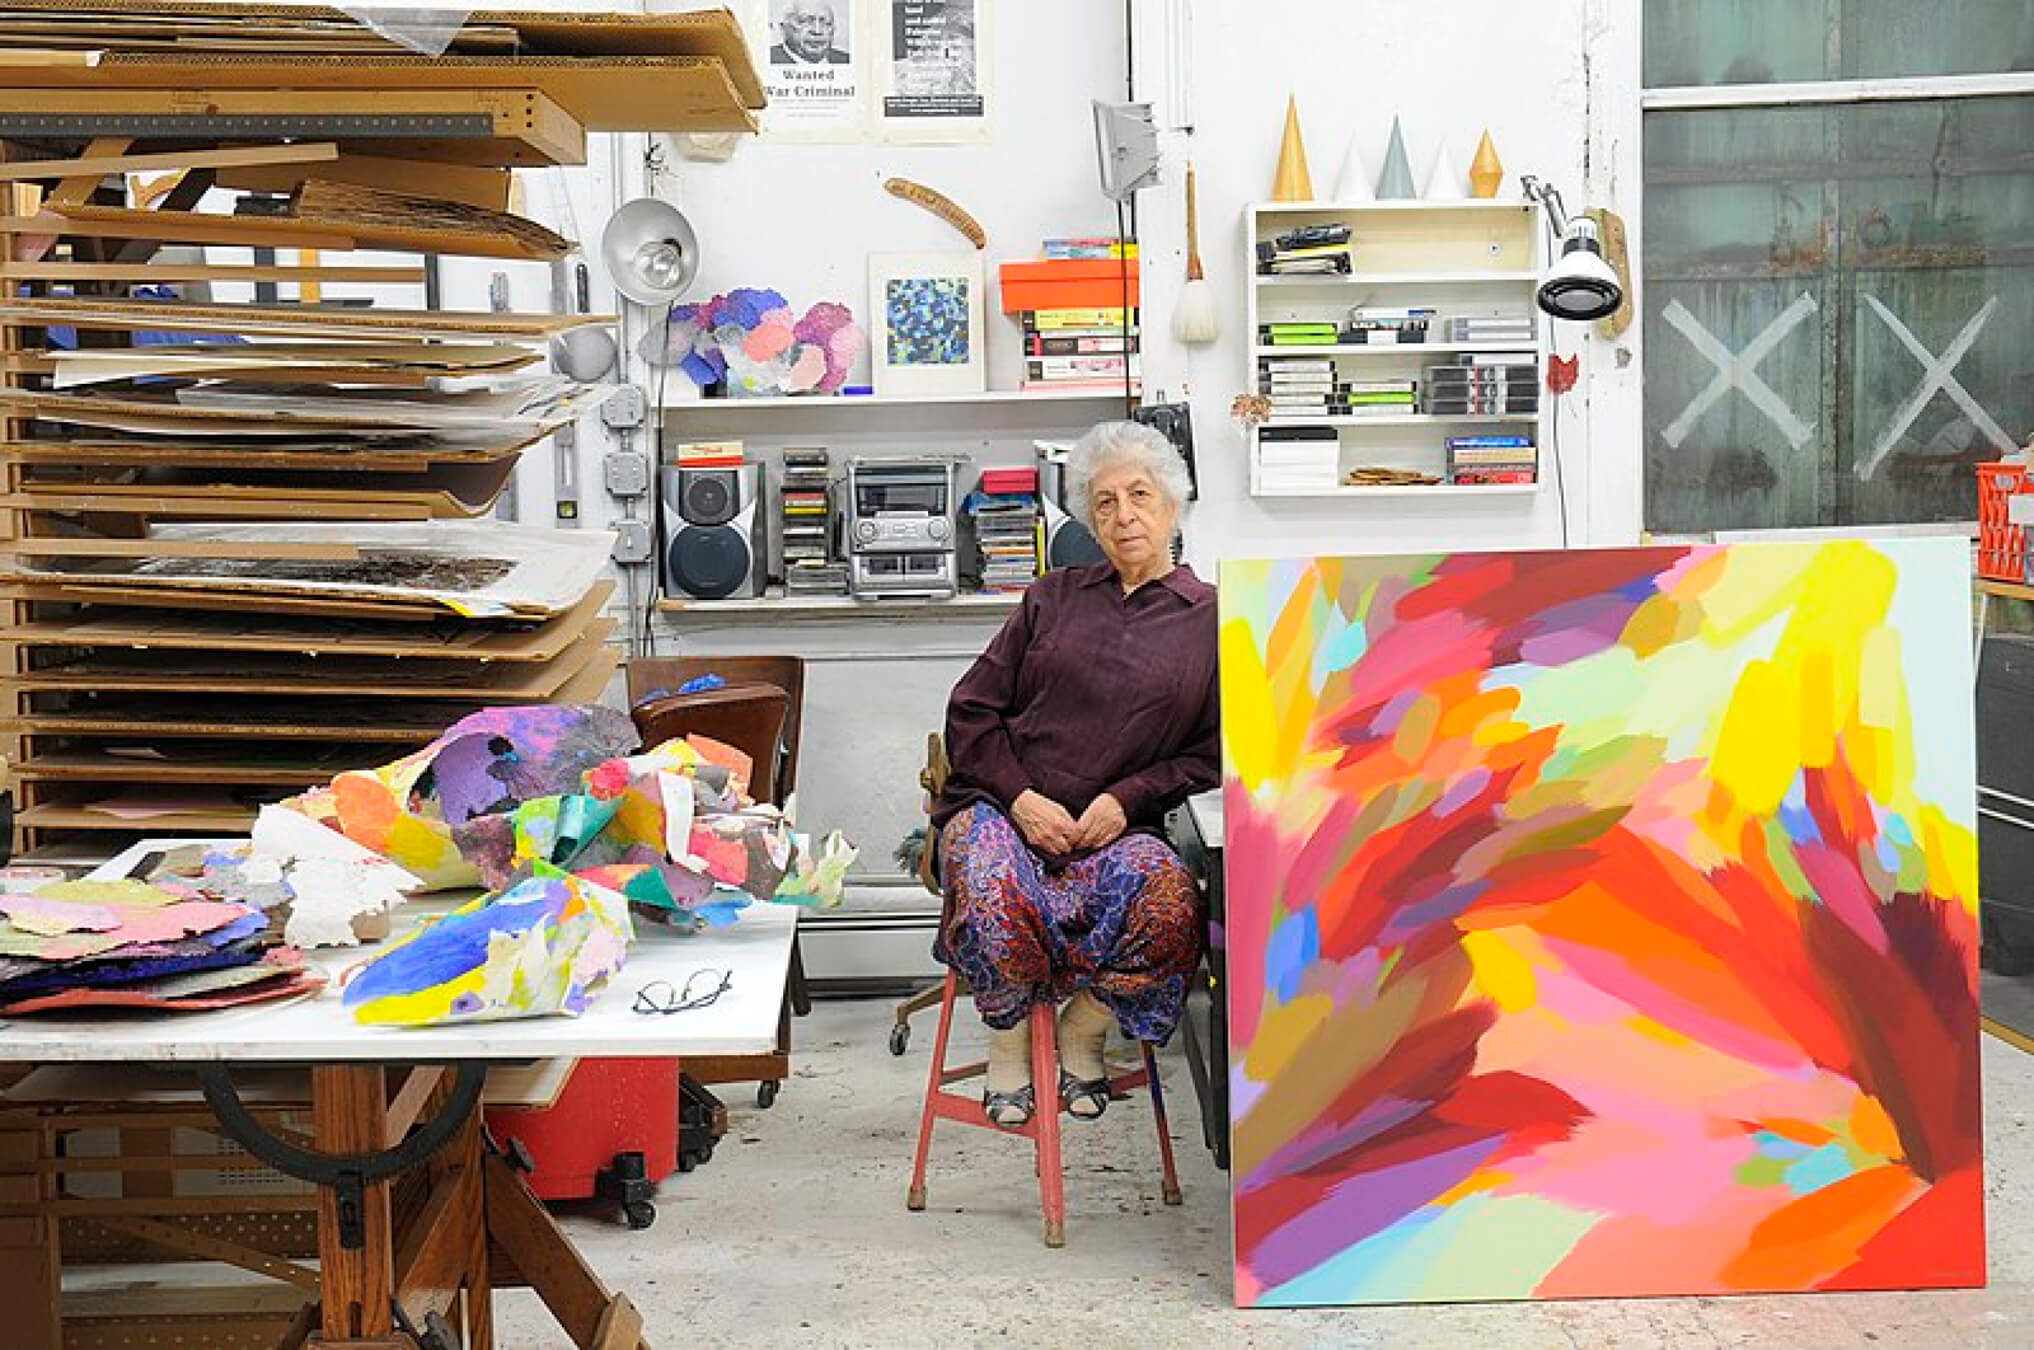 Samia Halaby in her studio, August 2016.